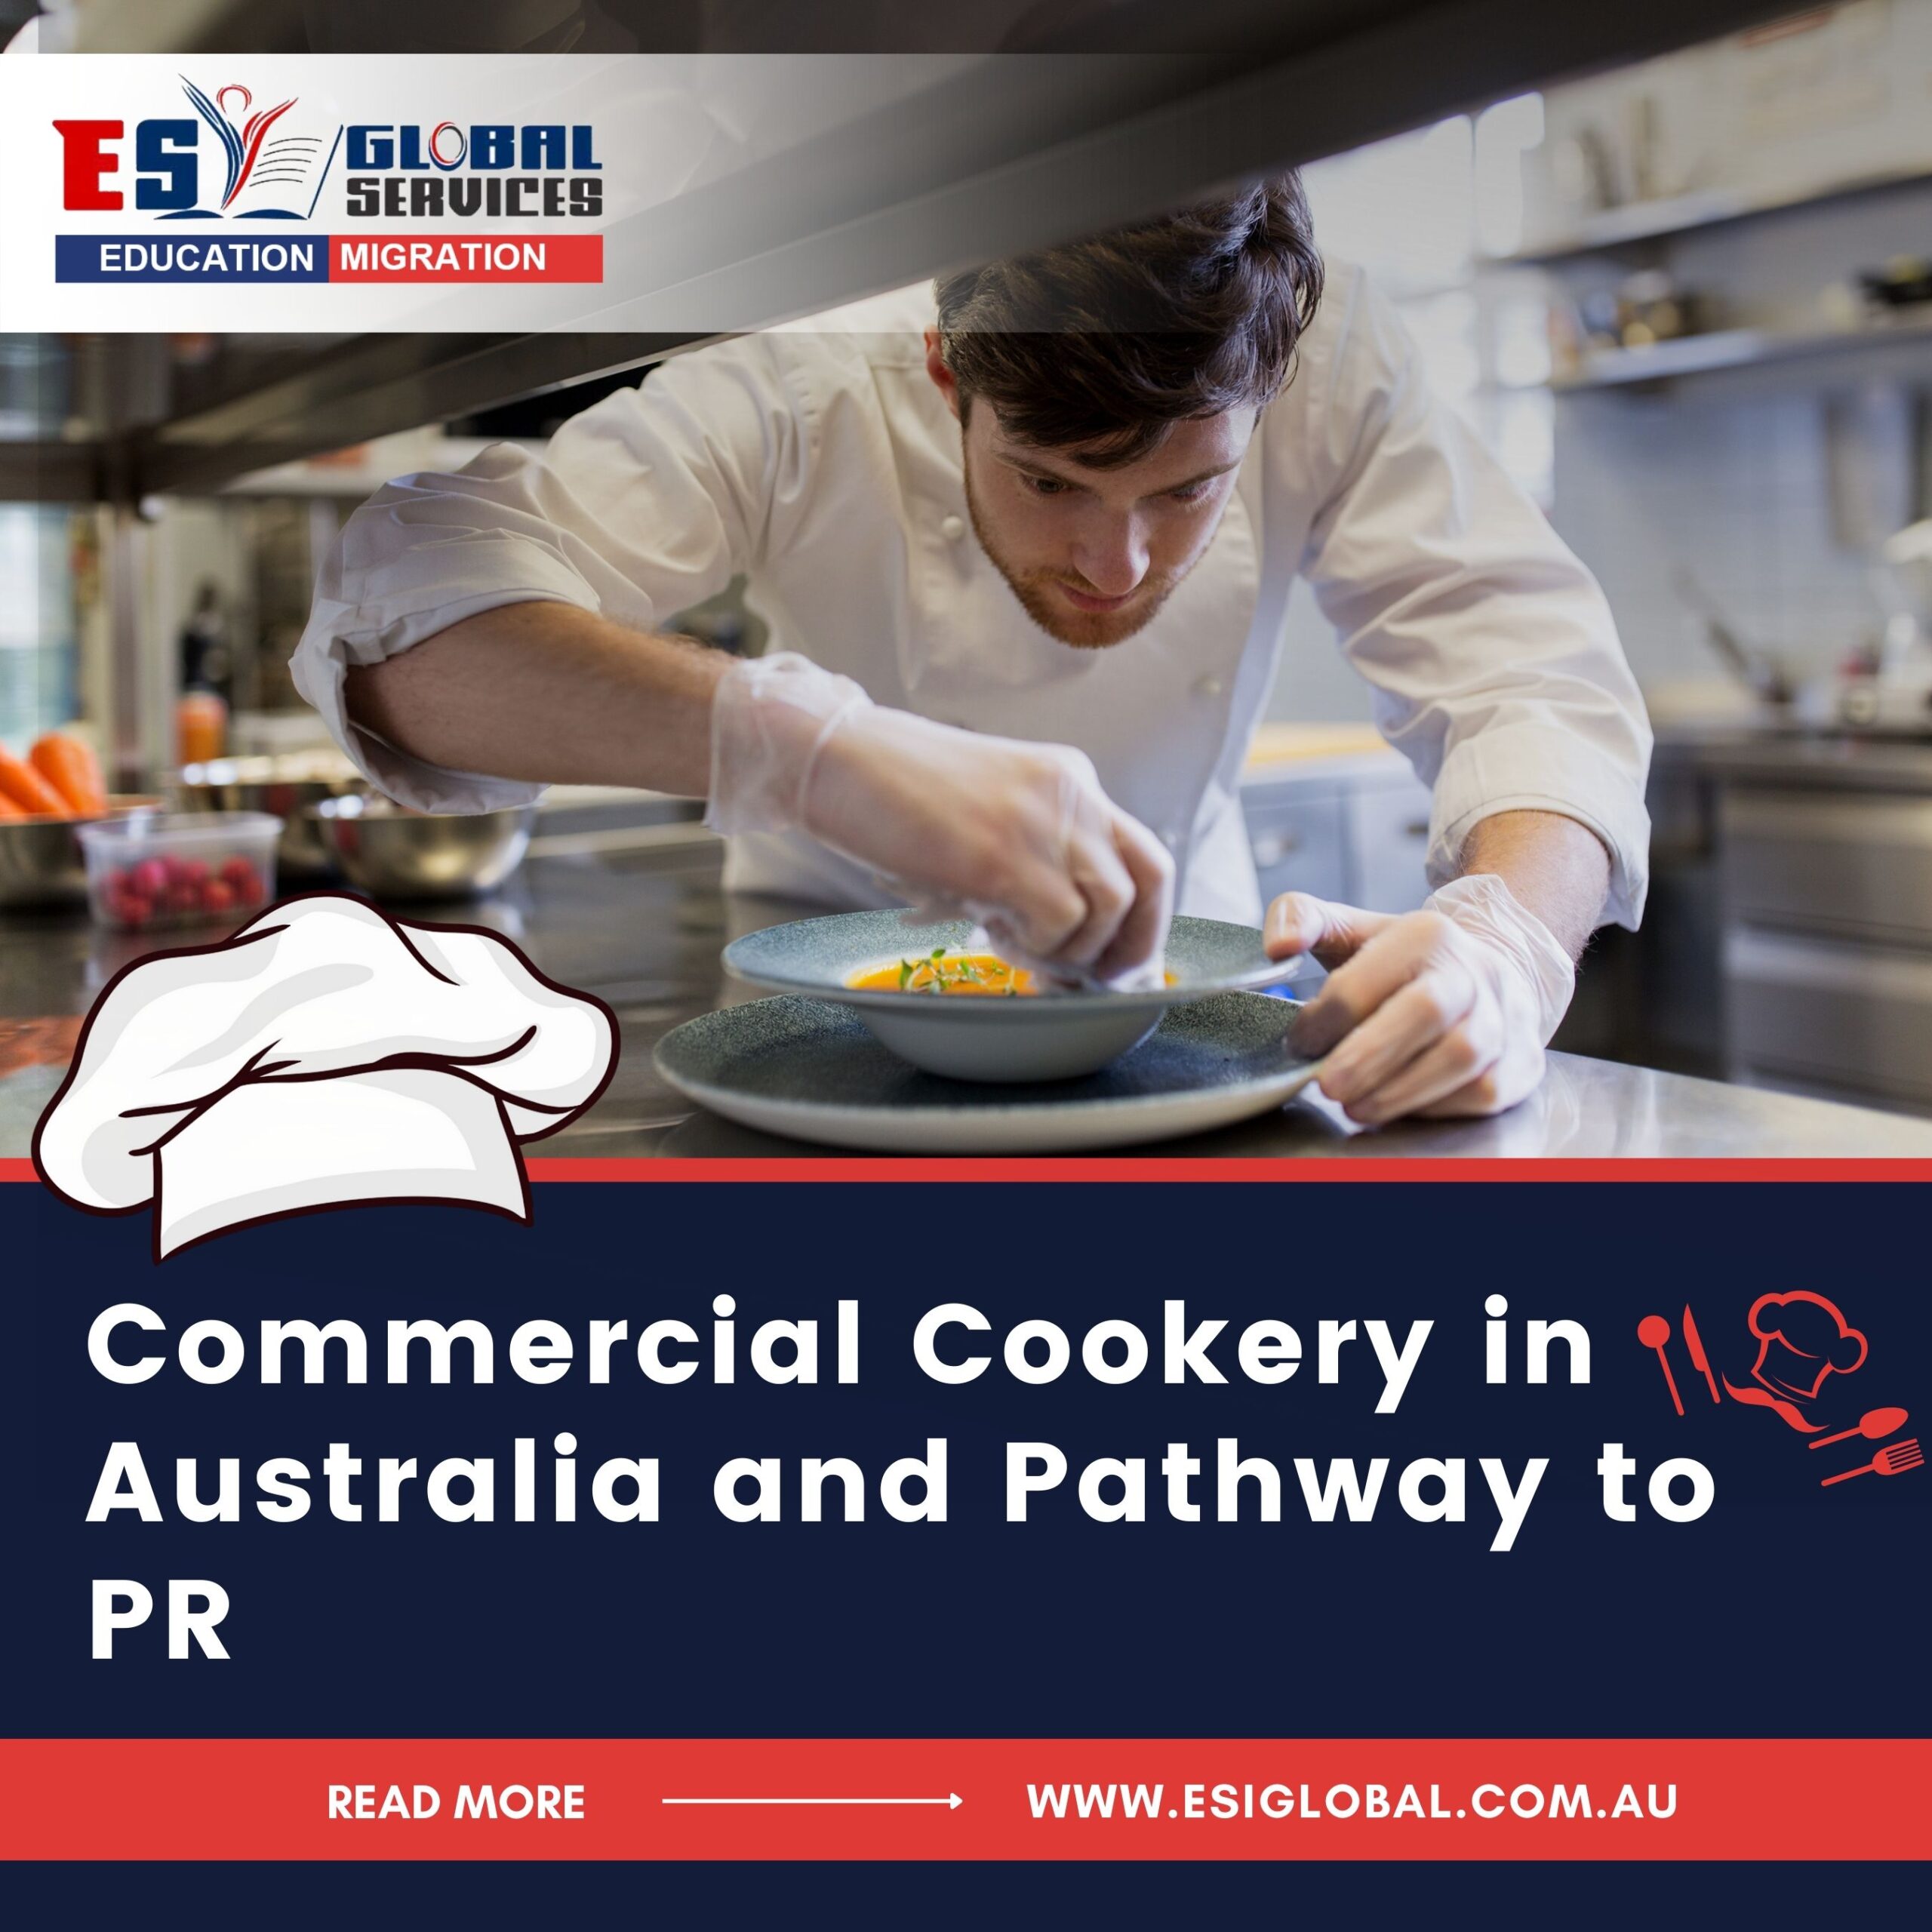 Commercial Cookery in Australia and Pathway to PR